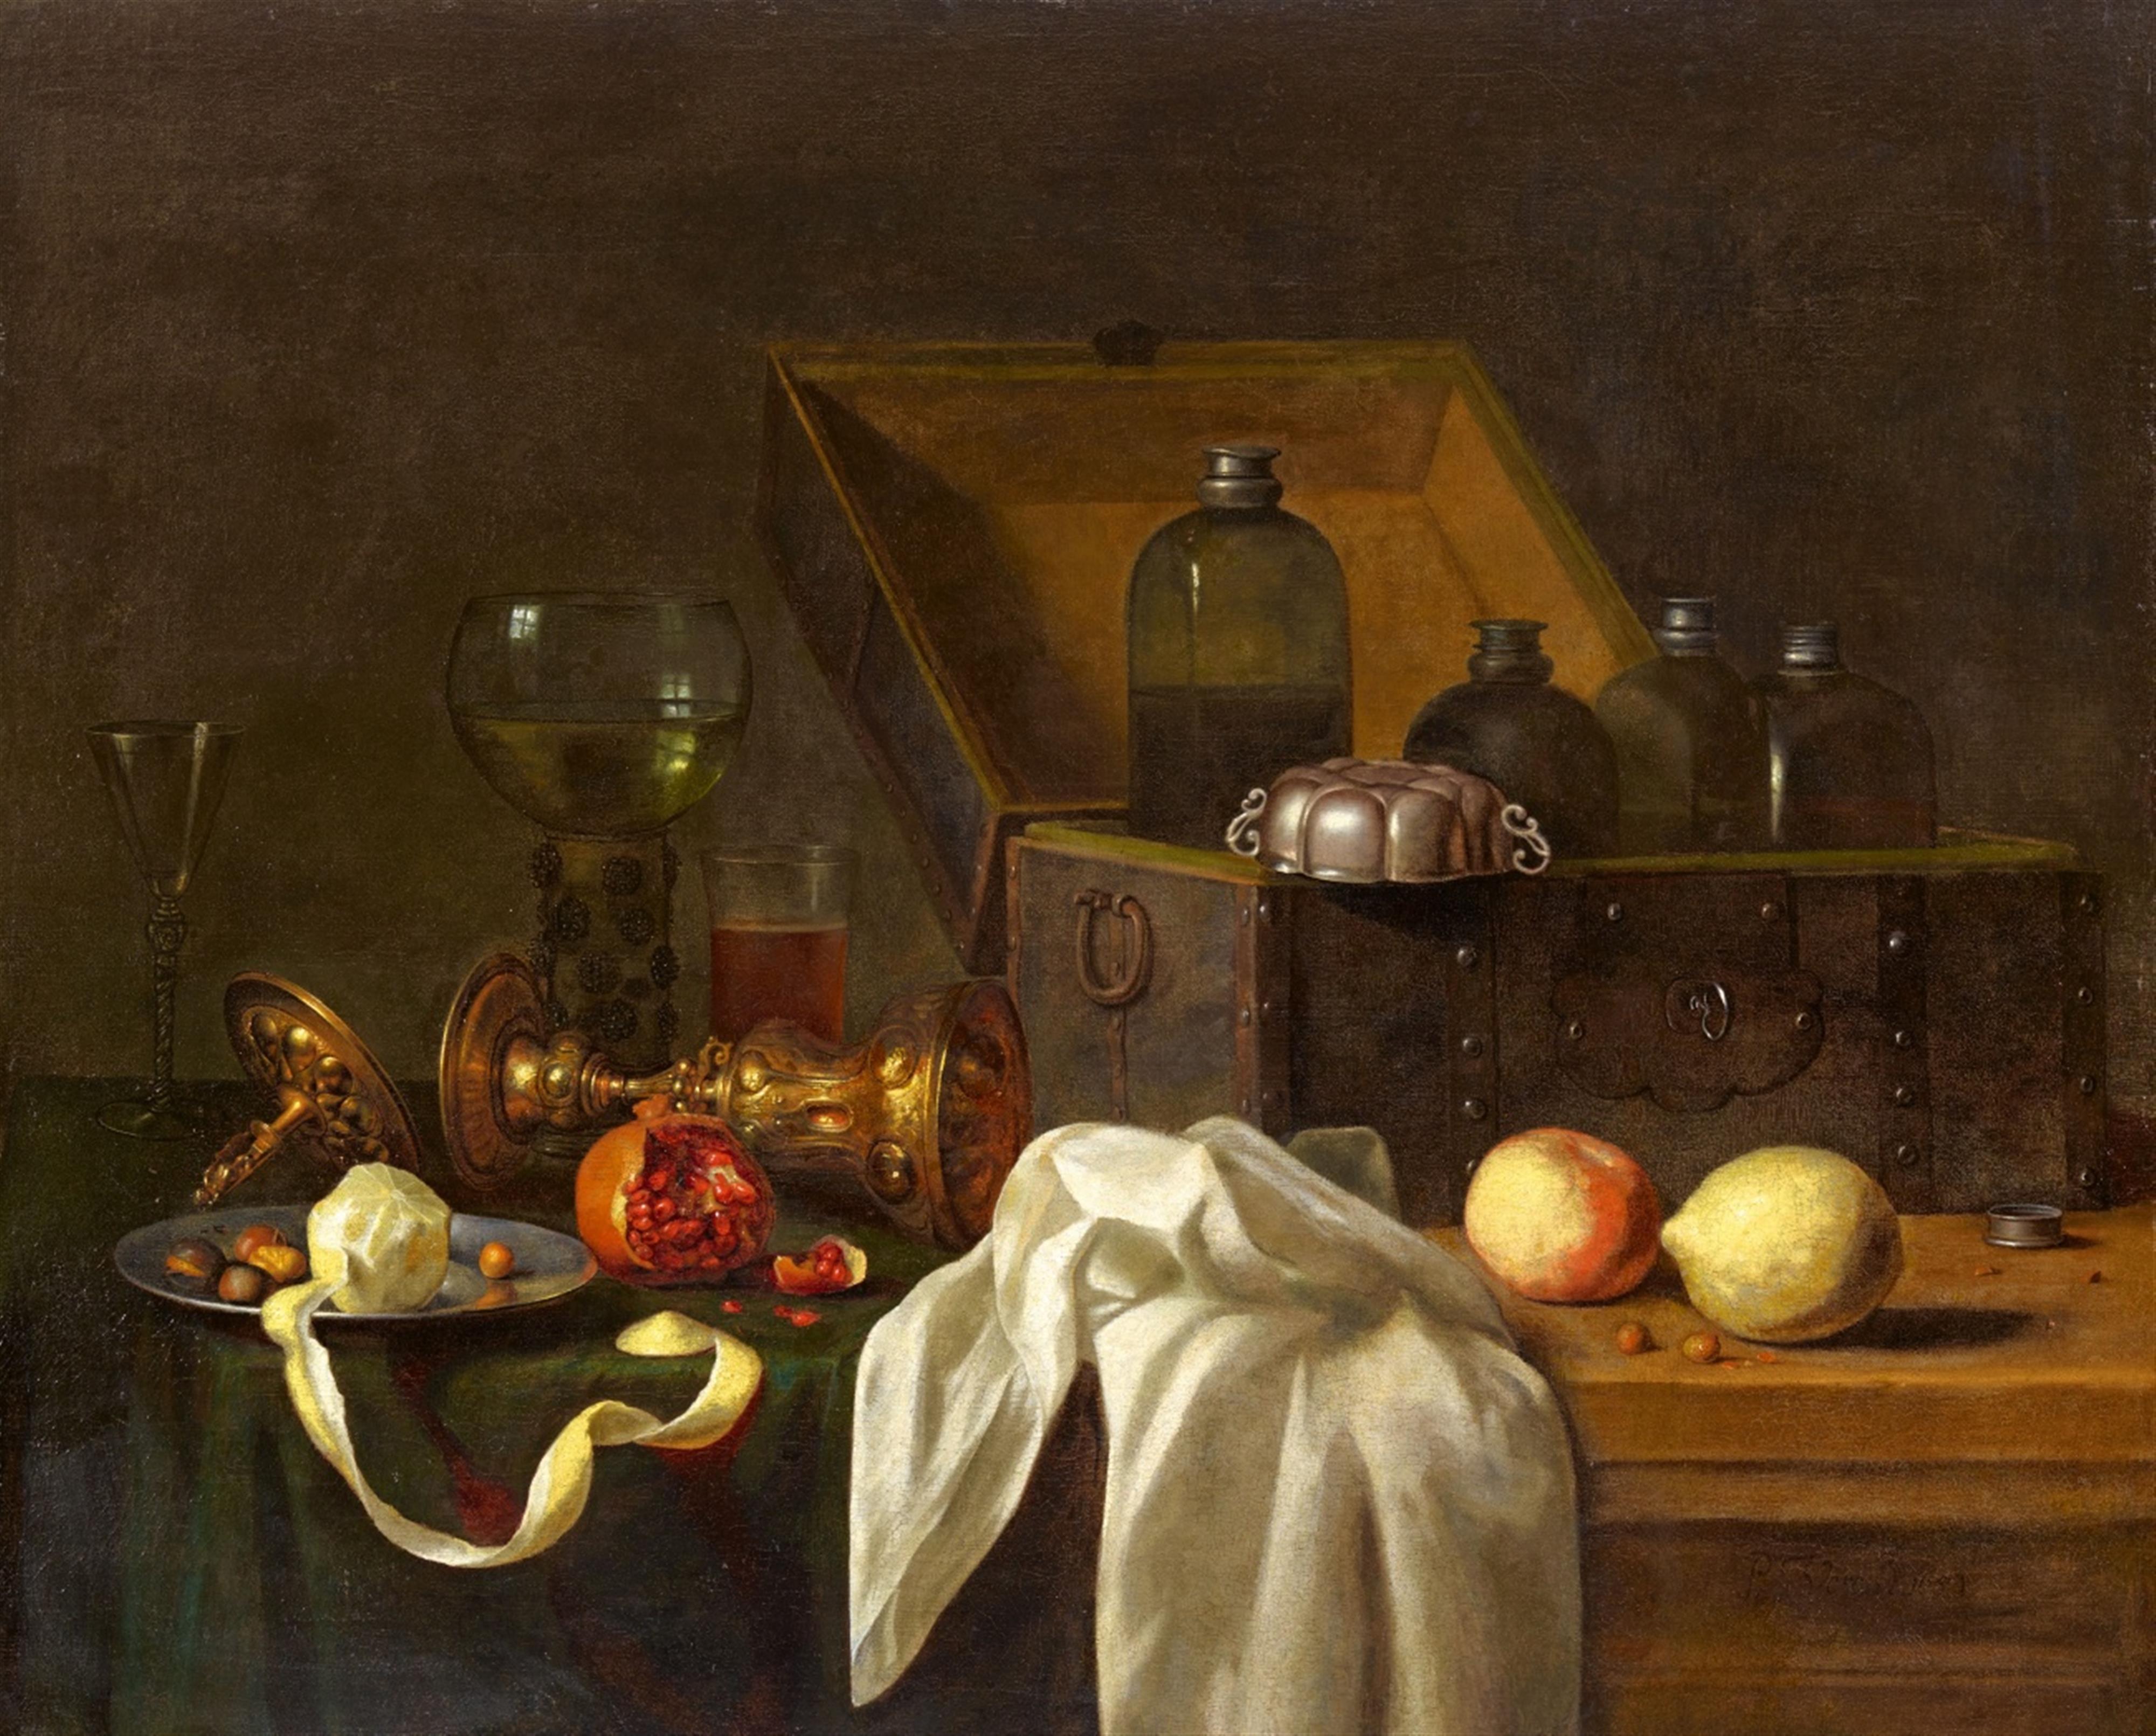 Pieter Harmensz. Verelst - Still Life with a Chest, Dish, Rummer, Columbine Cup, Pomegranate, Lemons, and Olives - image-1